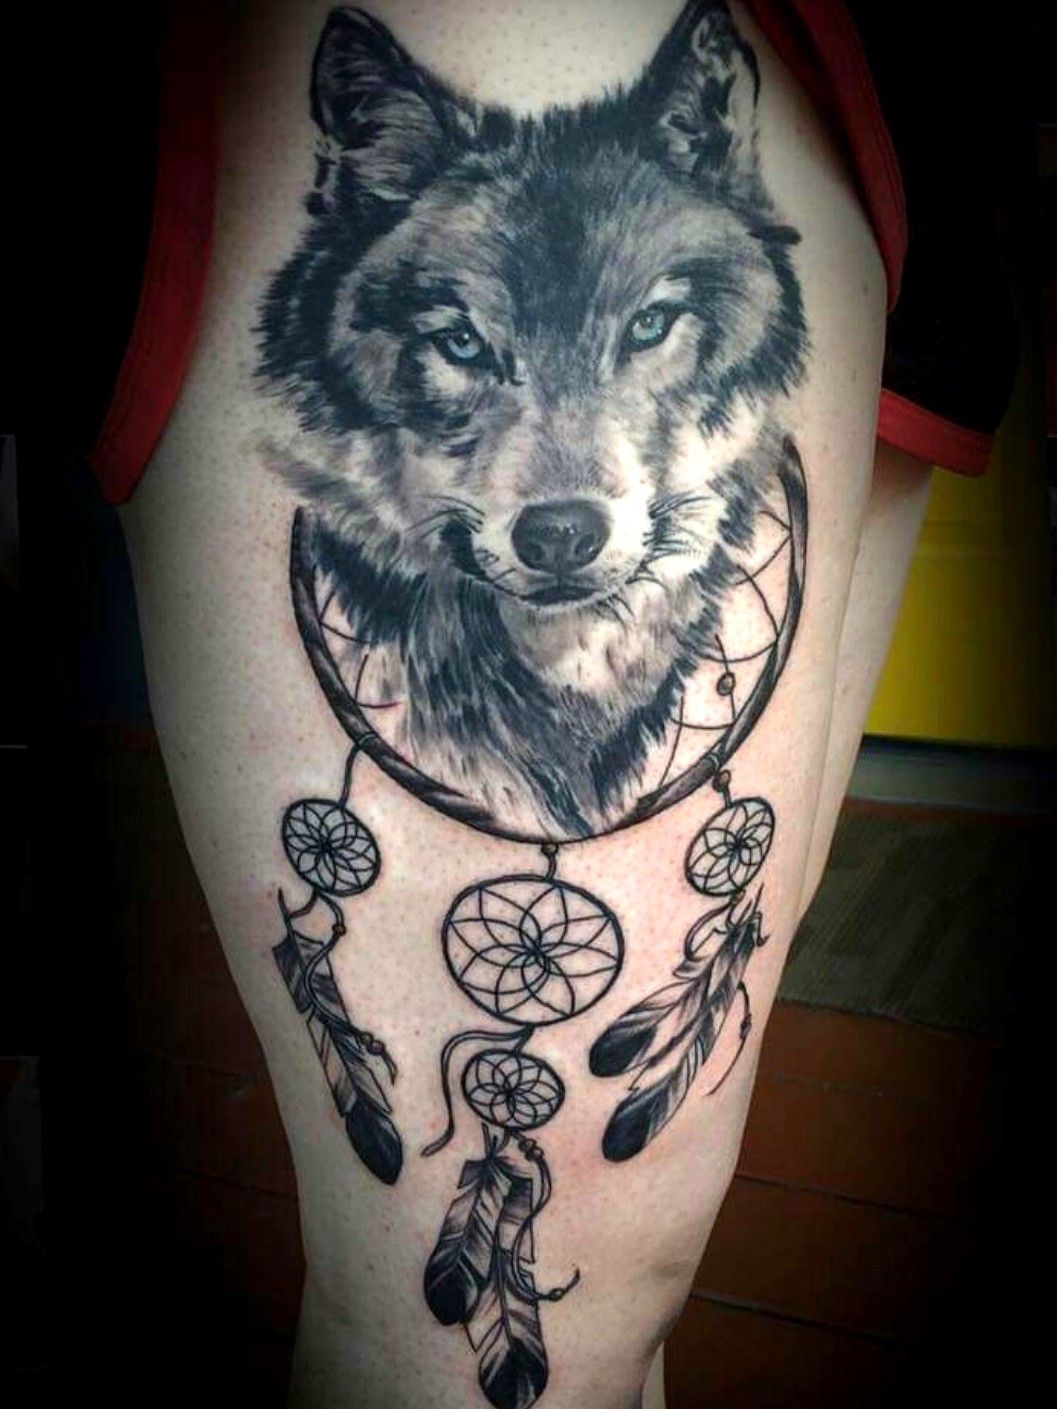 Abertawe Ink tattoo shop  Wolves and dream catcher tattoo by Rhys at  Abertawe Ink abertaweink tattoo girlswithtattoos tattoodesign  tattooideas tattoosleeve tattooist tattooing dreamcatcher wolf  wolftattoo wolves blackandgrey 